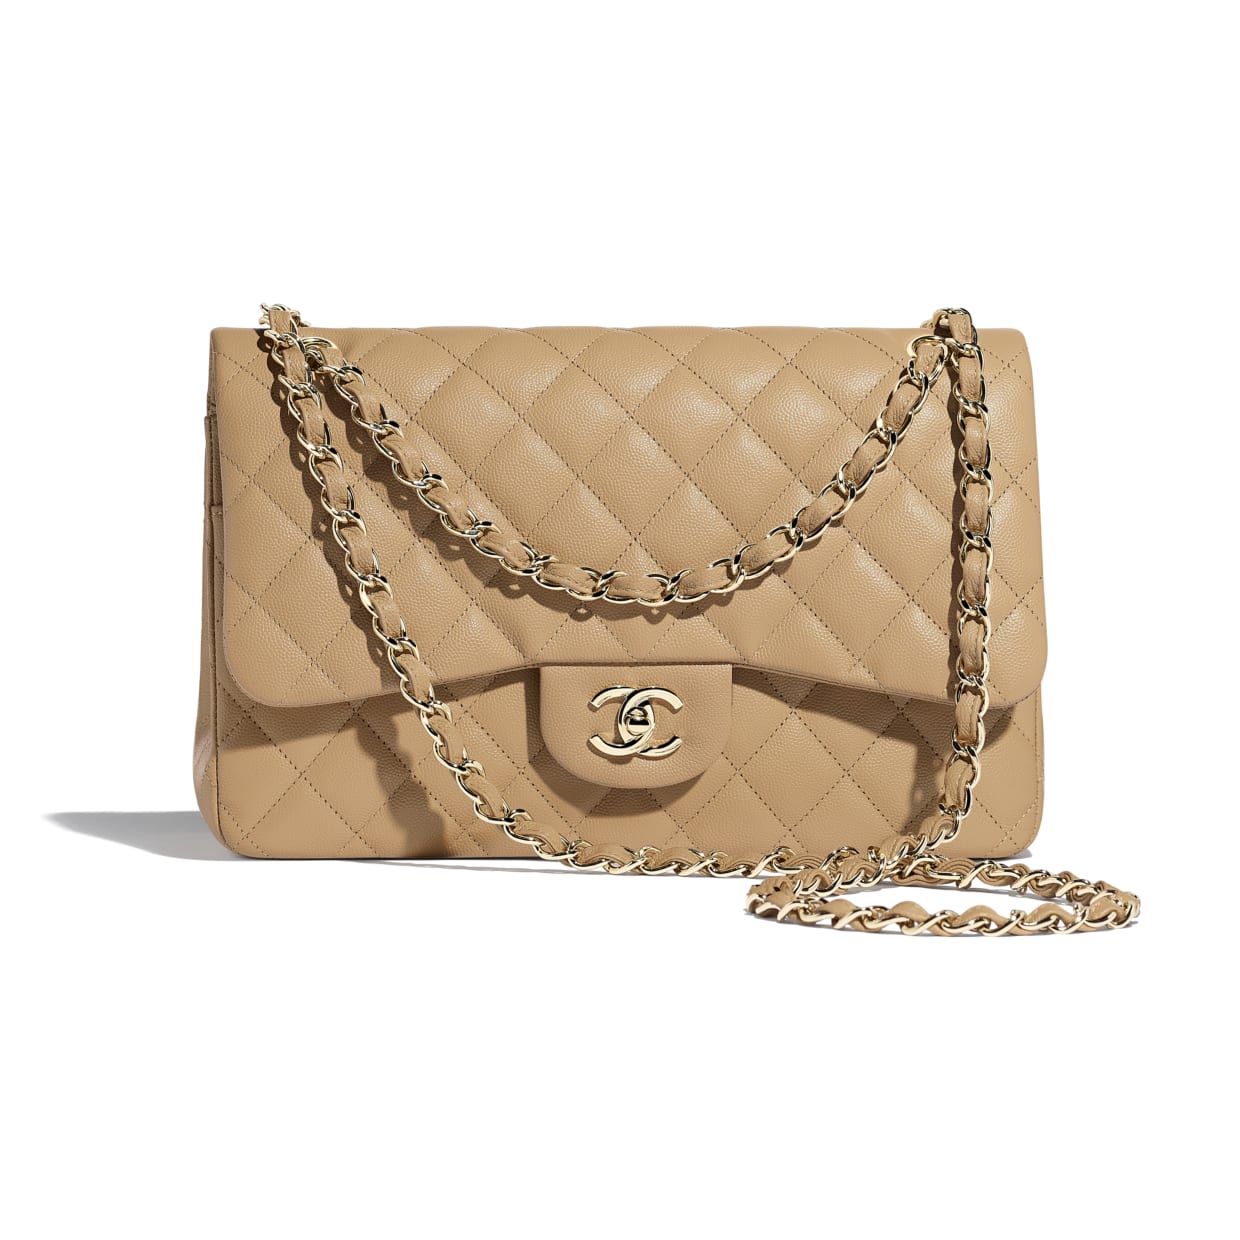 Chanel Fall/Winter 2019 Act 1 Bag Collection - Spotted Fashion